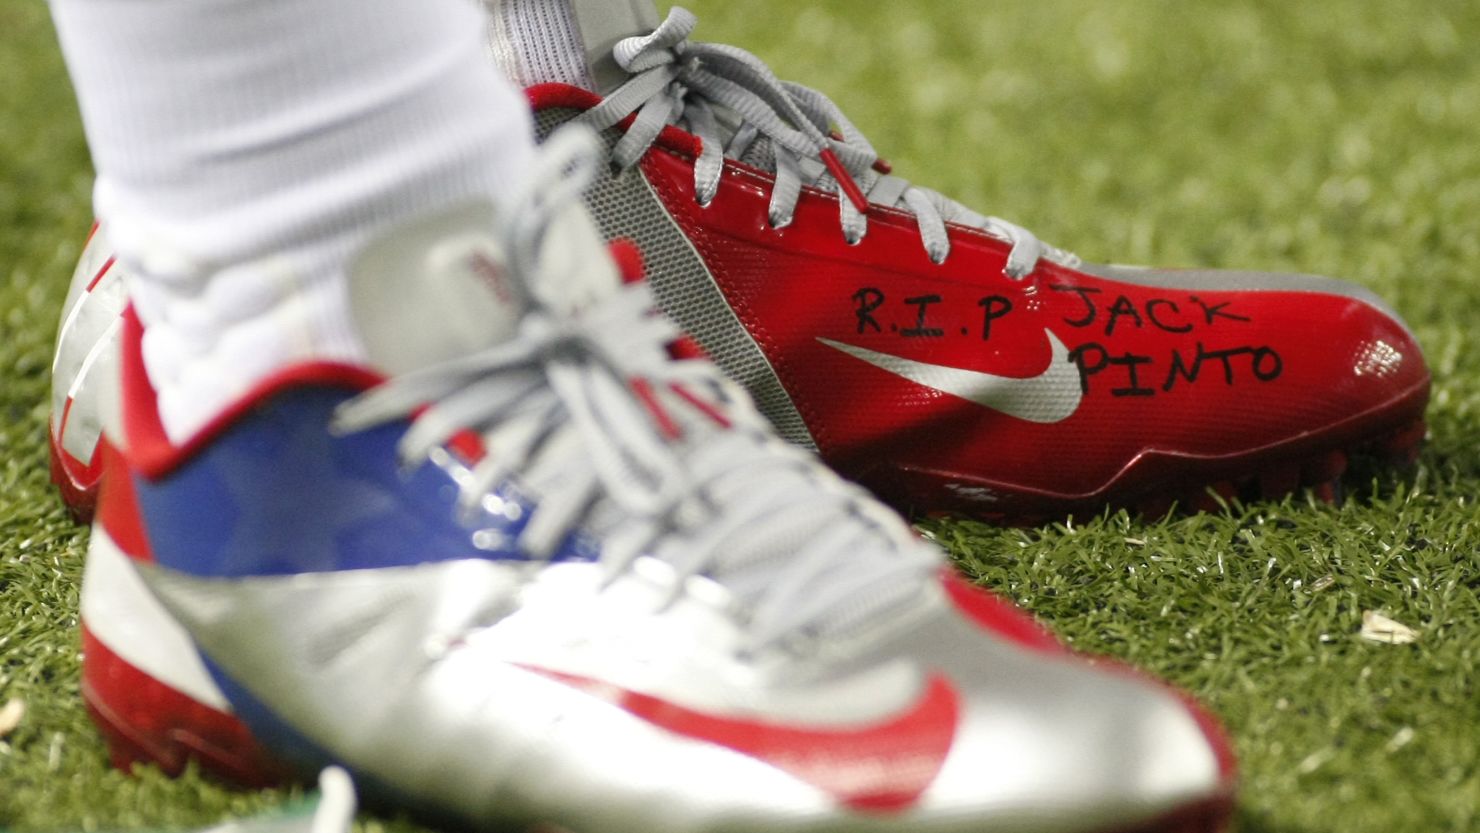 Victor Cruz's shoes bore a tribute to Jack Pinto, one of the children killed in the Sandy Hook Elementary shooting.